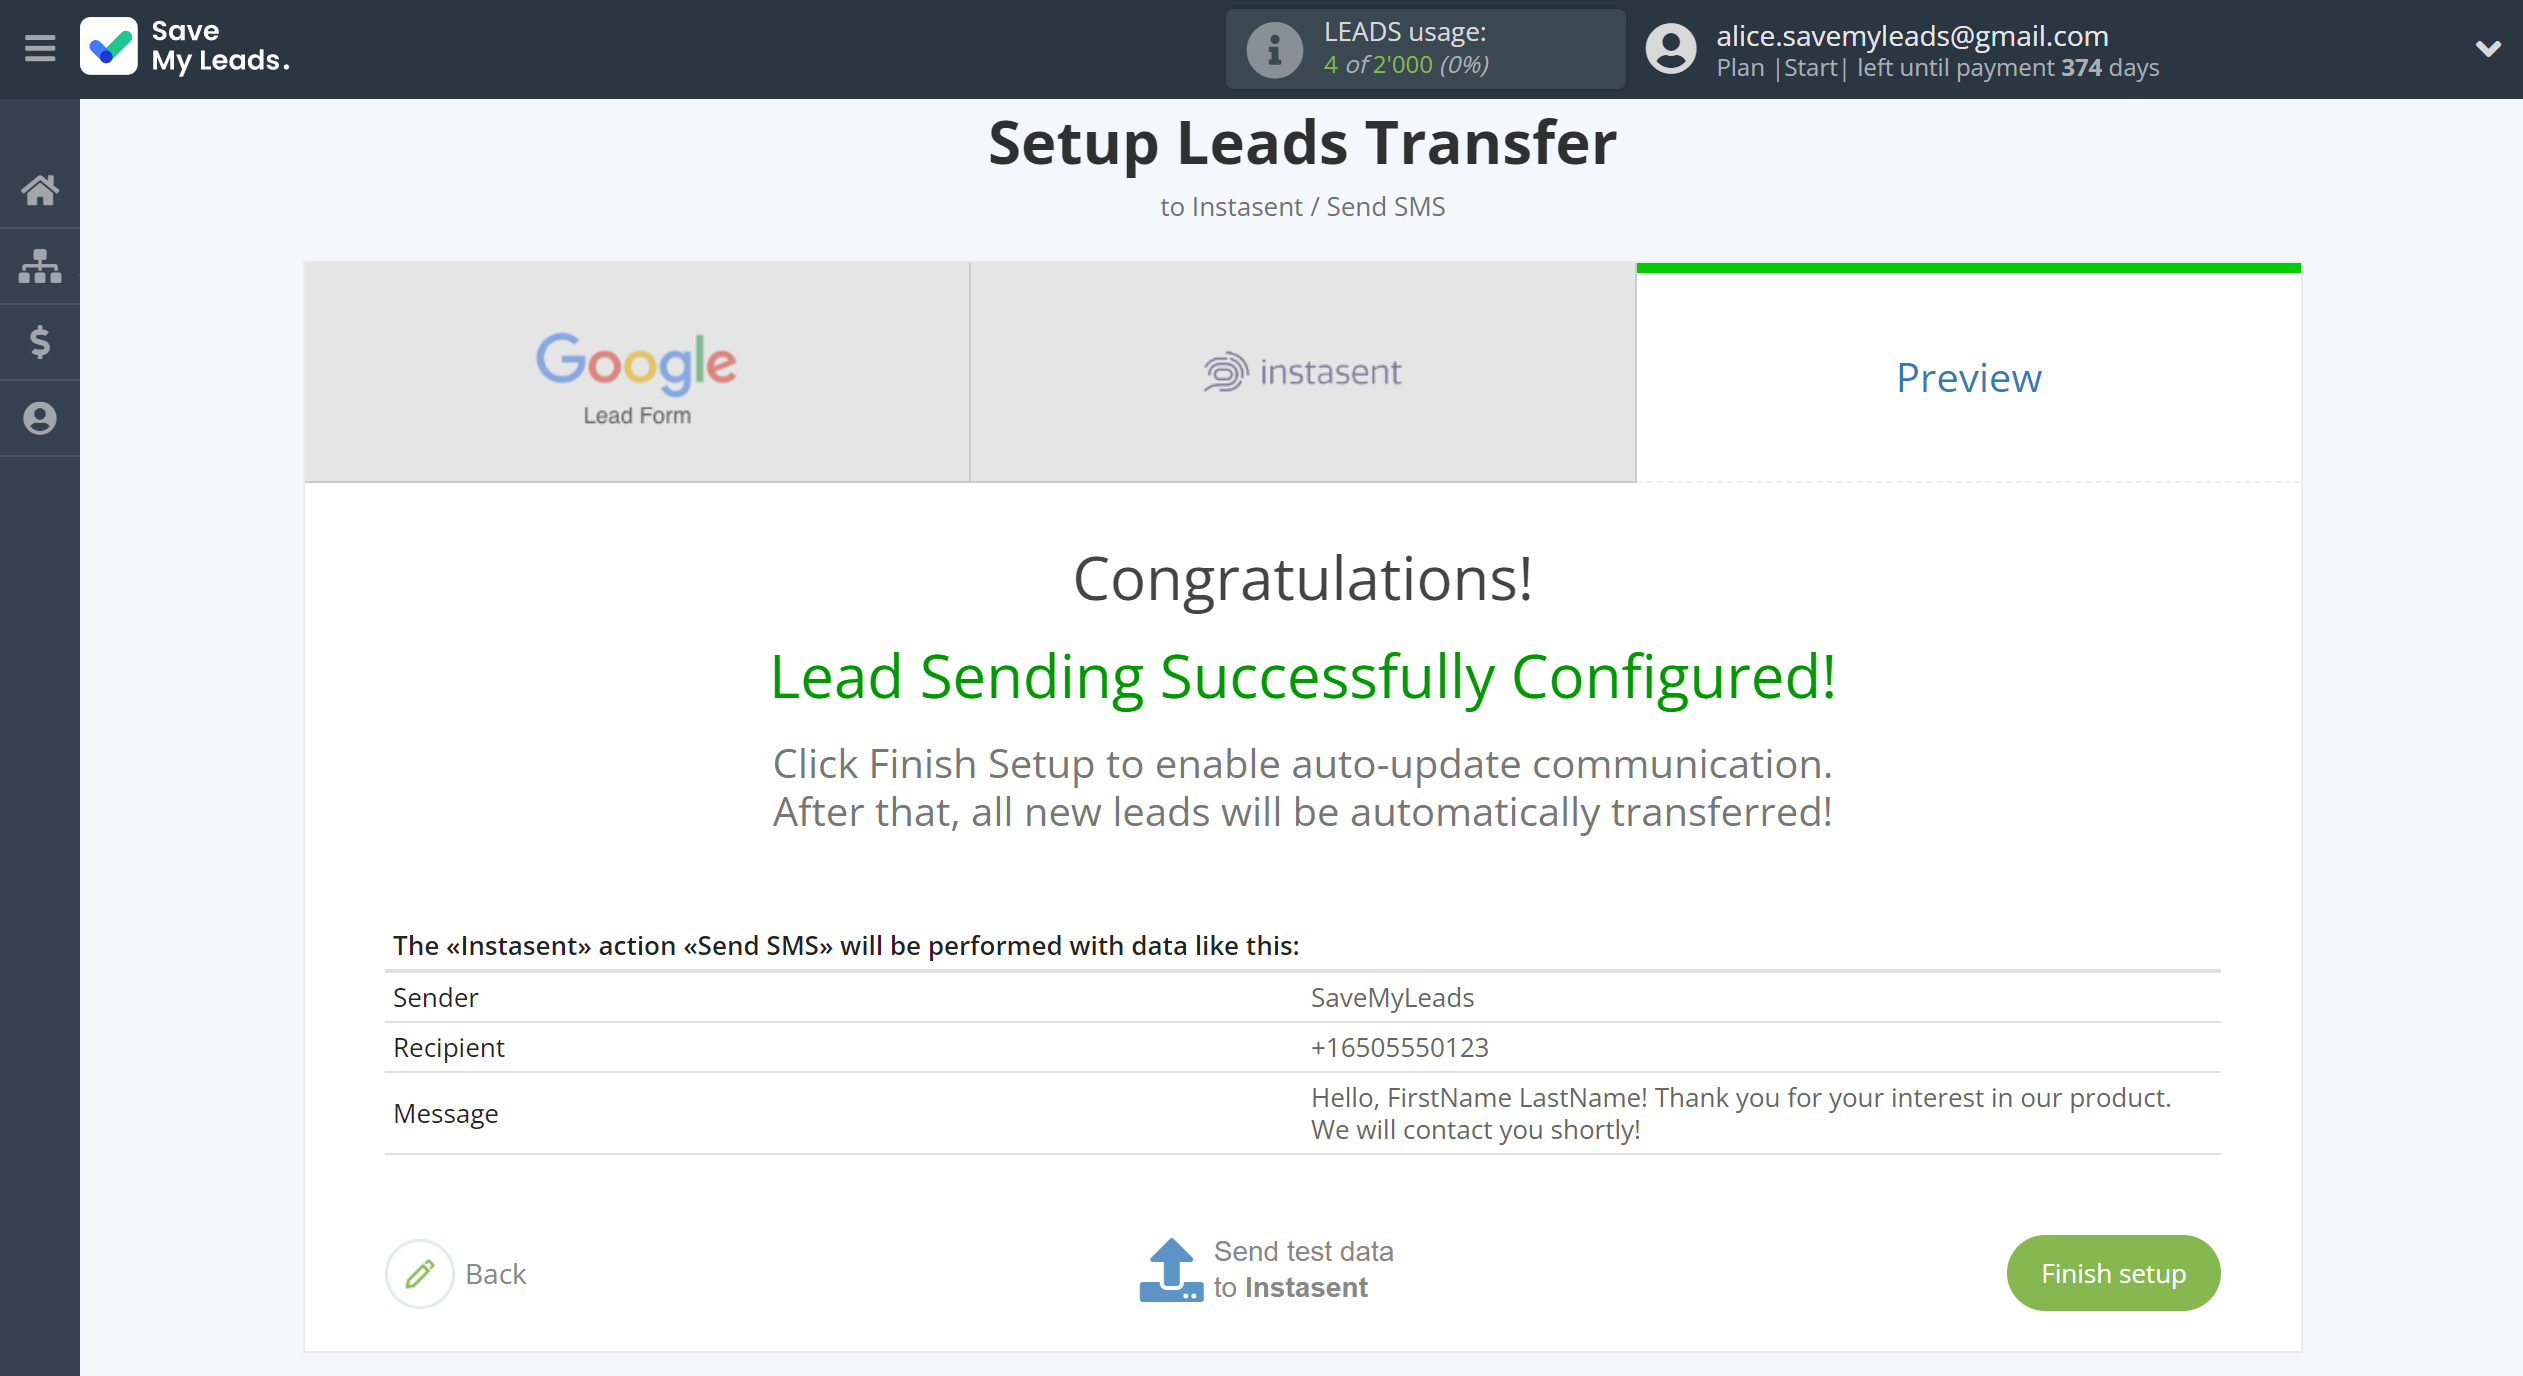 How to Connect Google Lead Form with Instasent | Test data